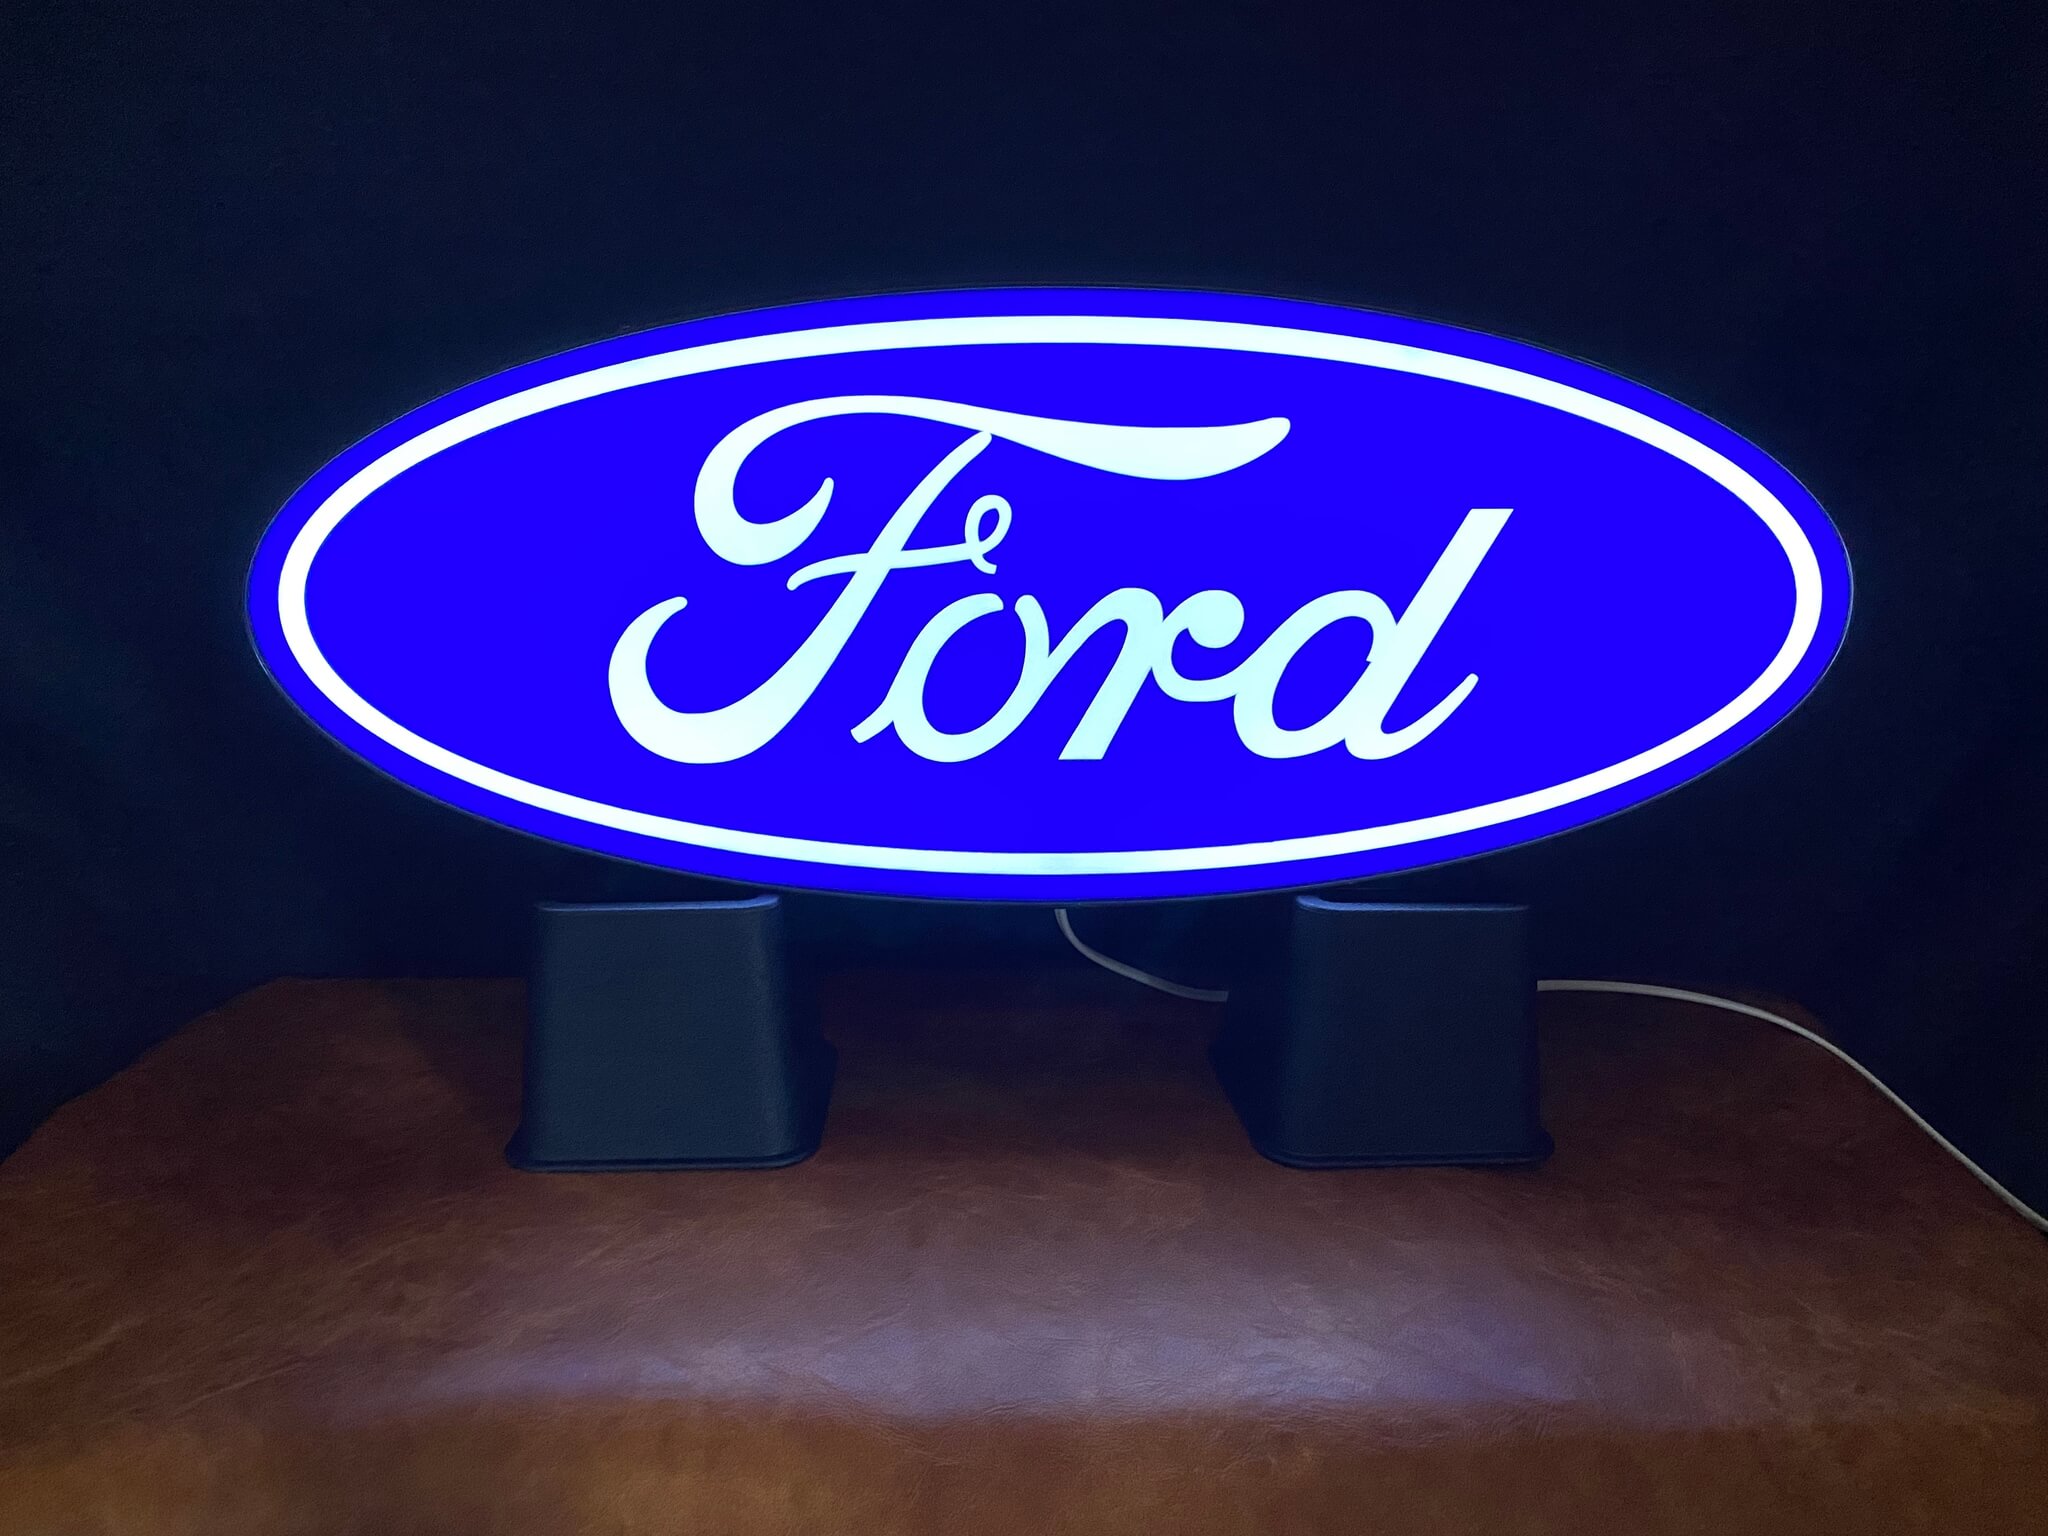 No Reserve Ford Illuminated Sign